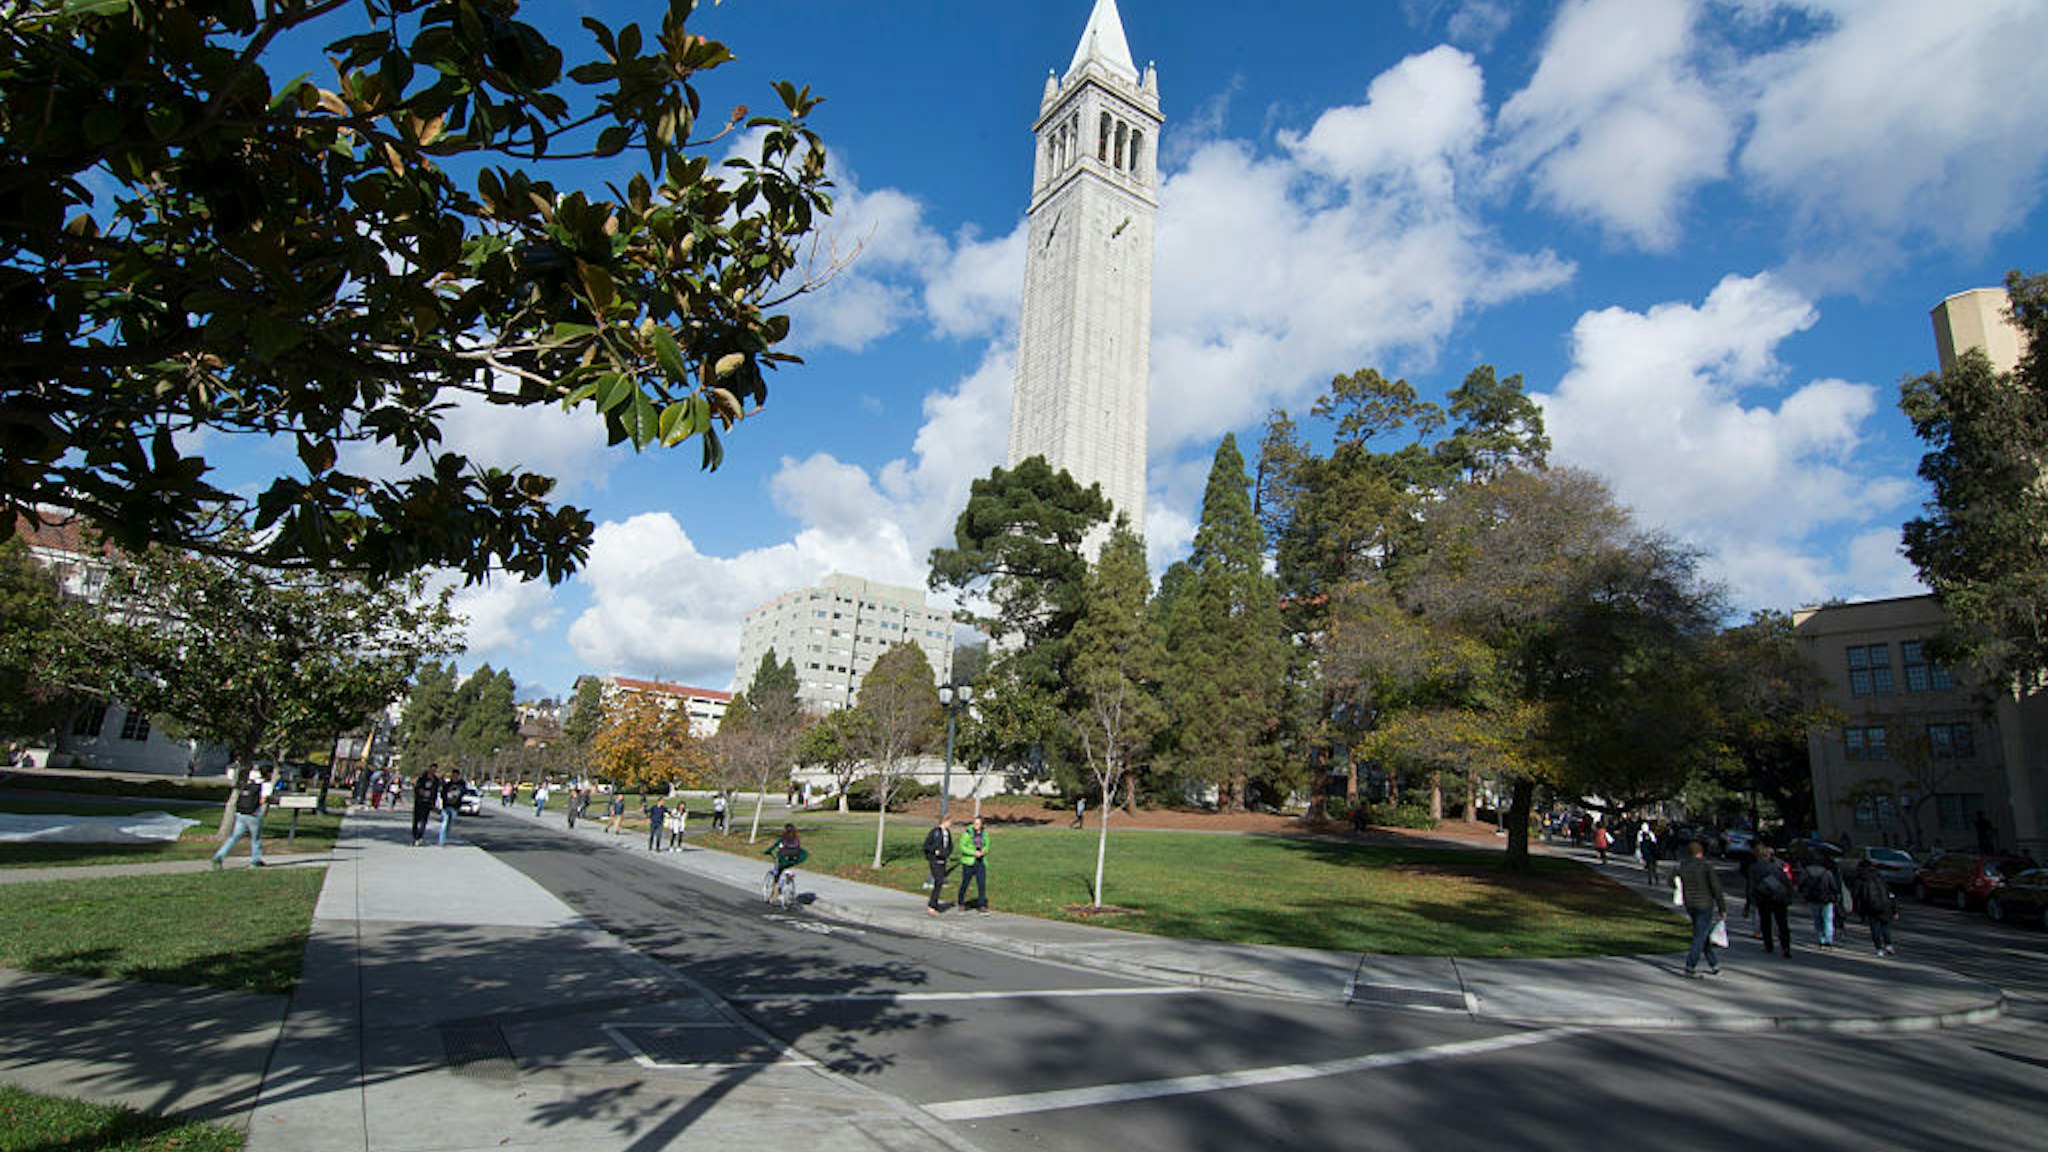 Berkeley California University of California at Berkeley, students with Sather Tower or Campanile tower in background with clouds and color.